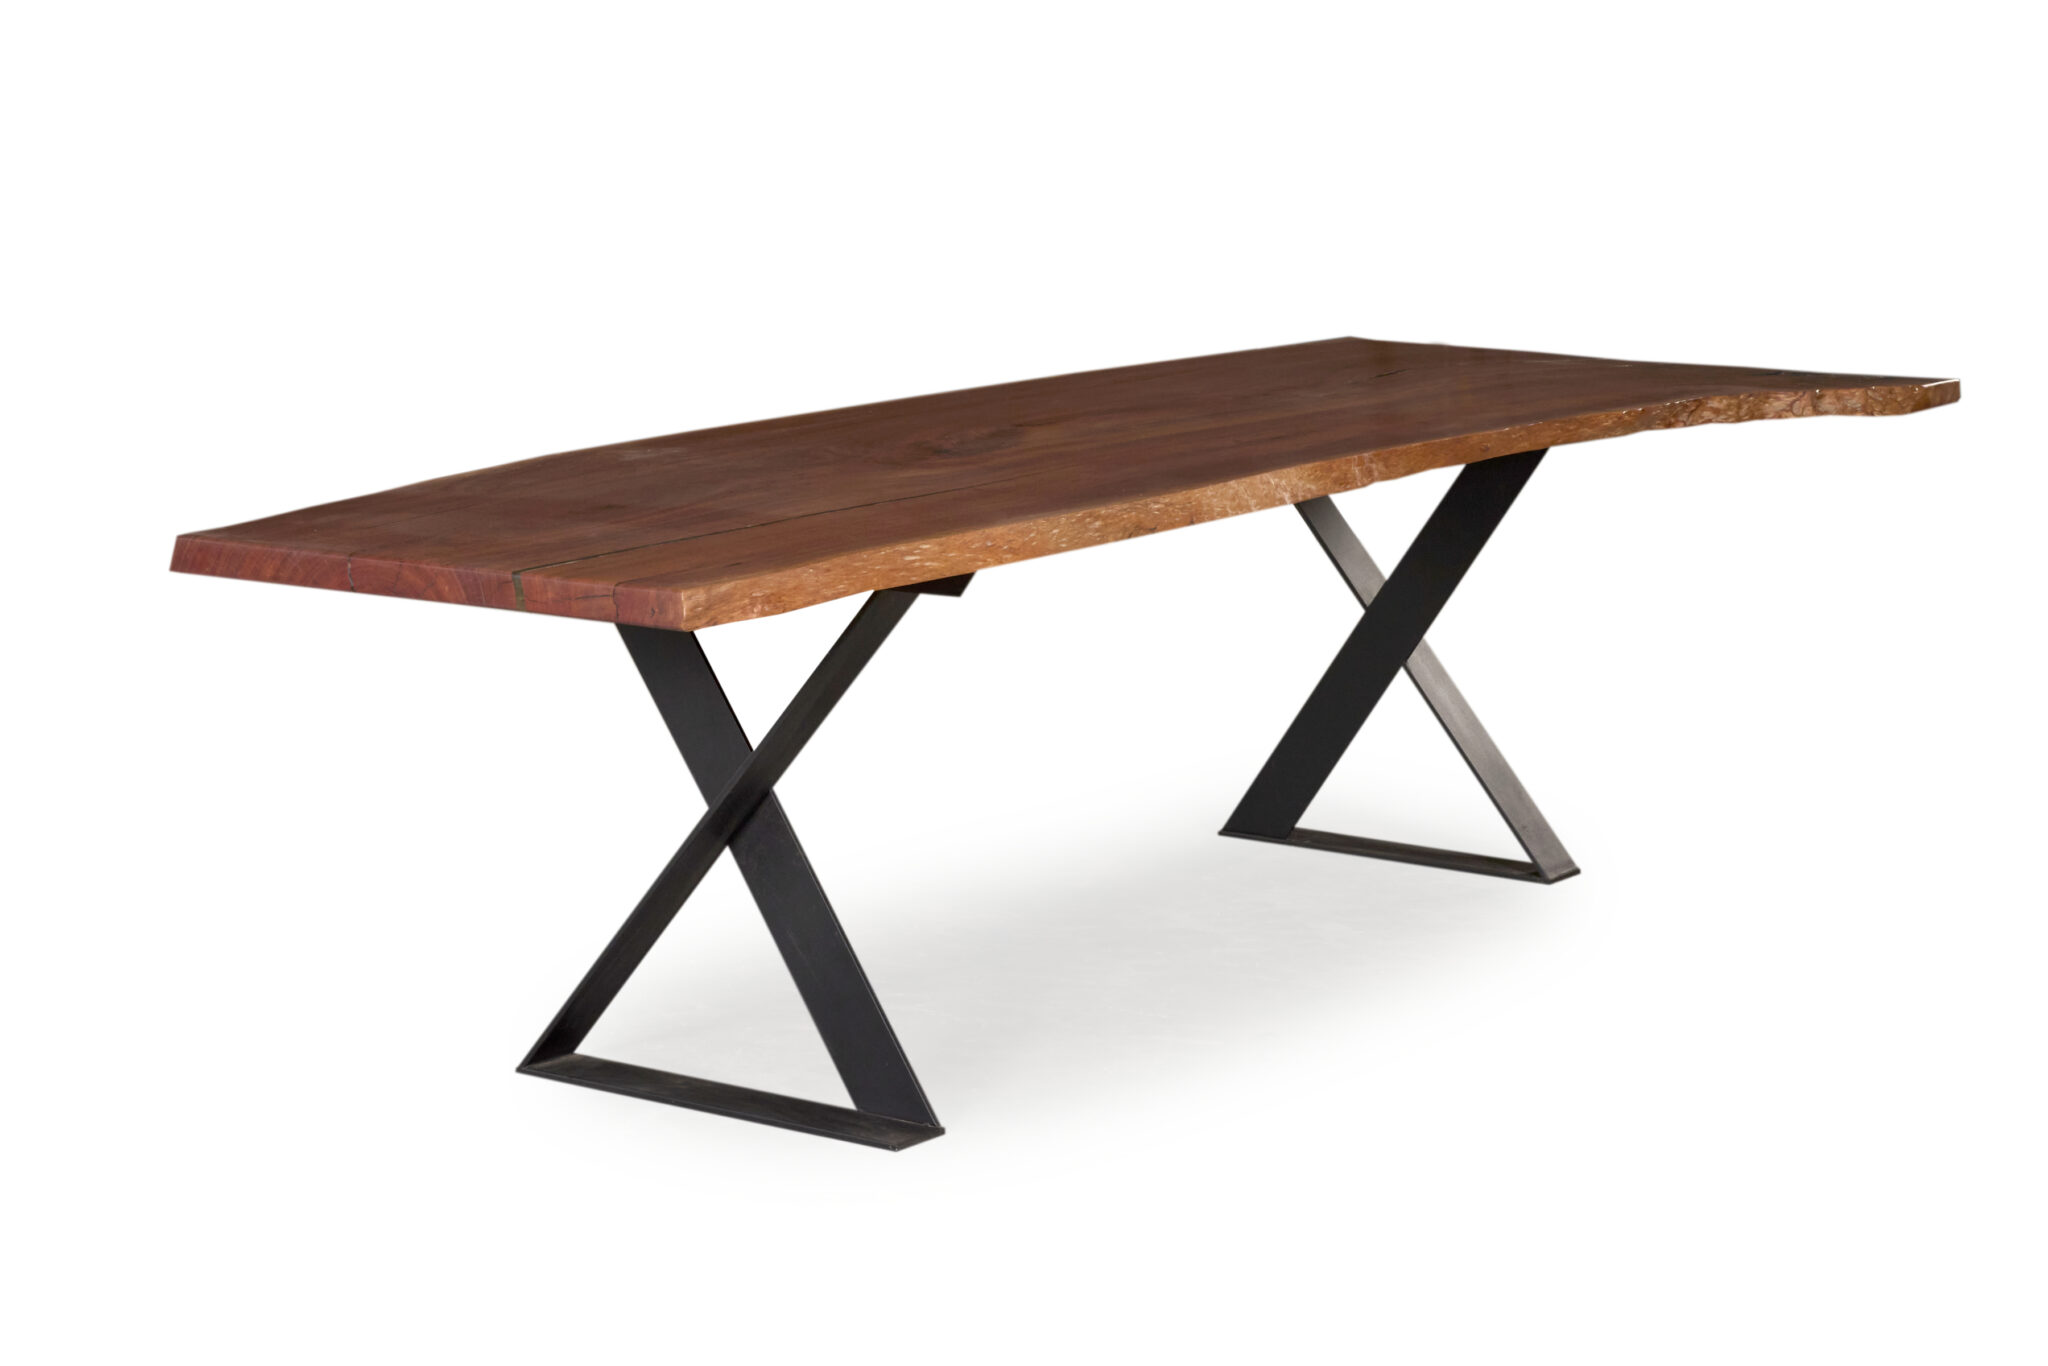 Vaucluse Dining Table: Redgum timber with sleek X leg steel black base and natural edge.